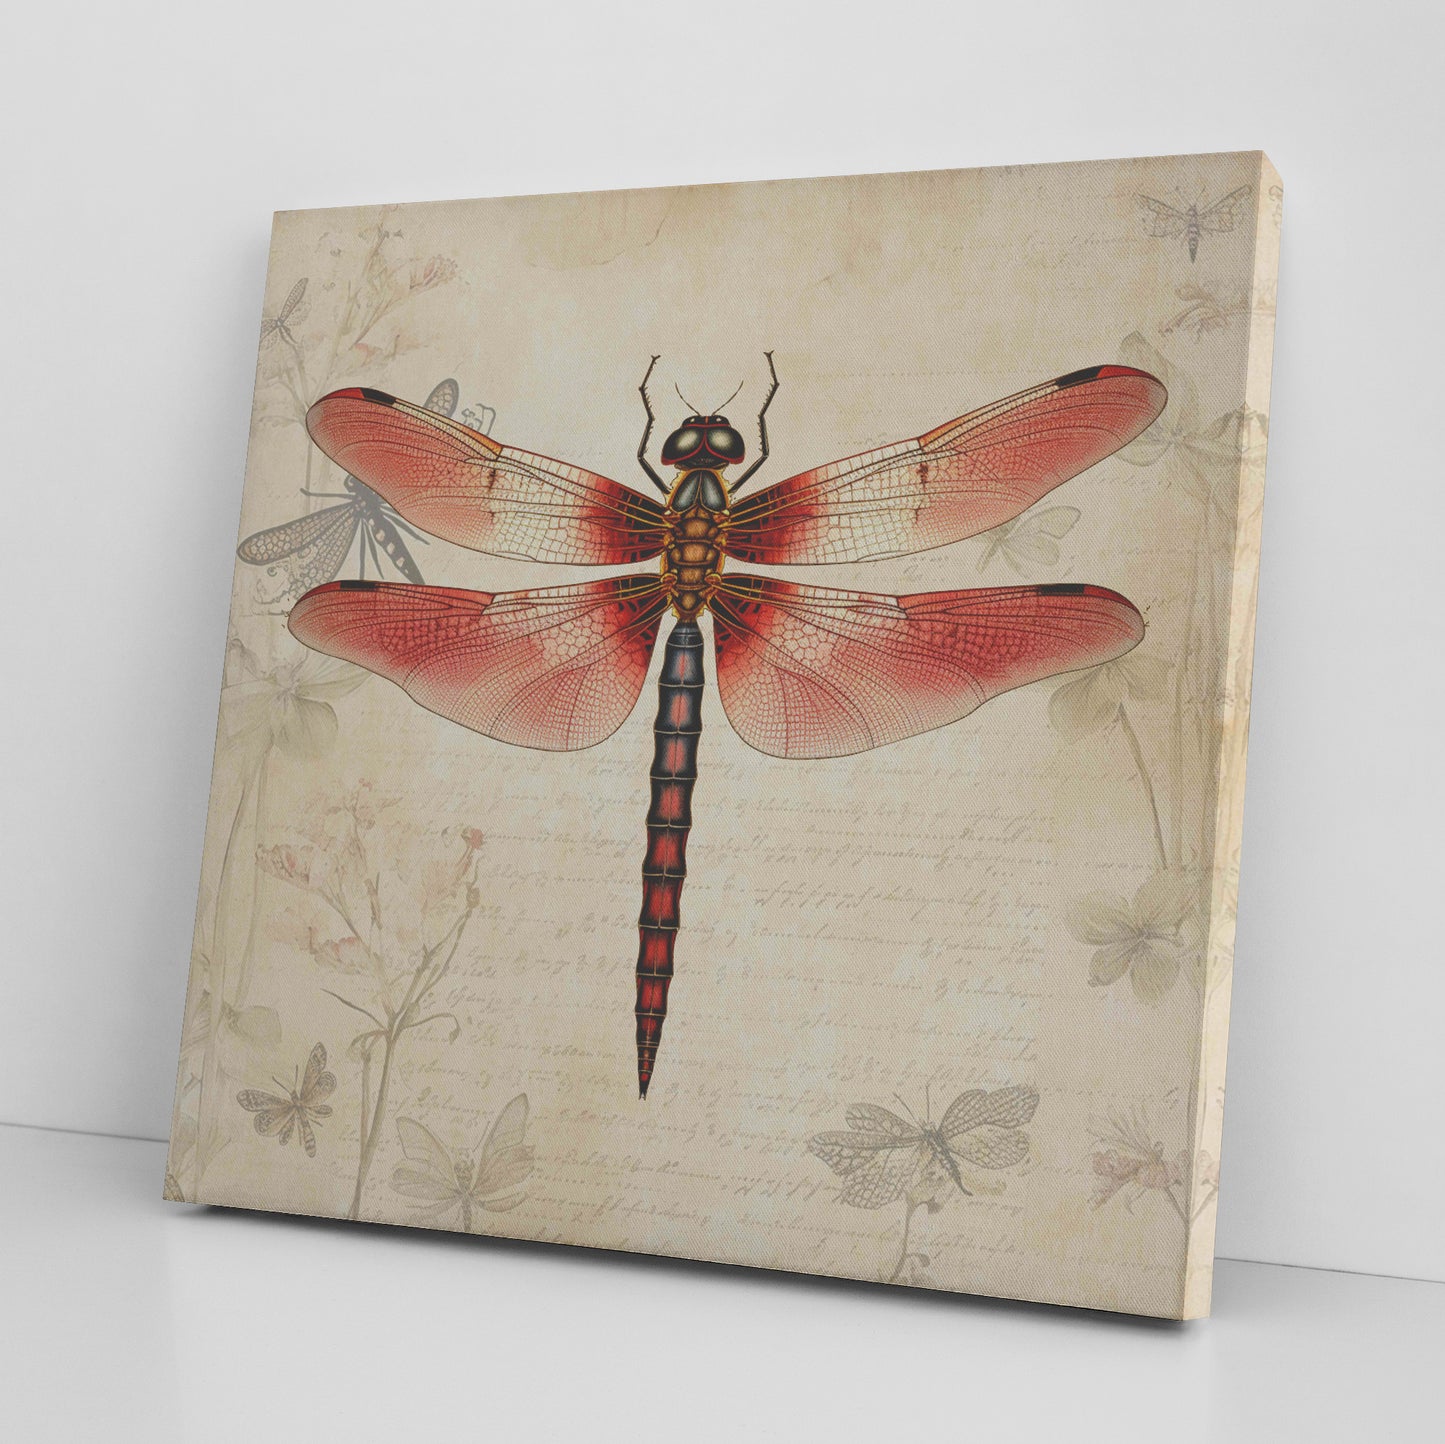 Vintage Dragonfly Canvas Art Print - Red